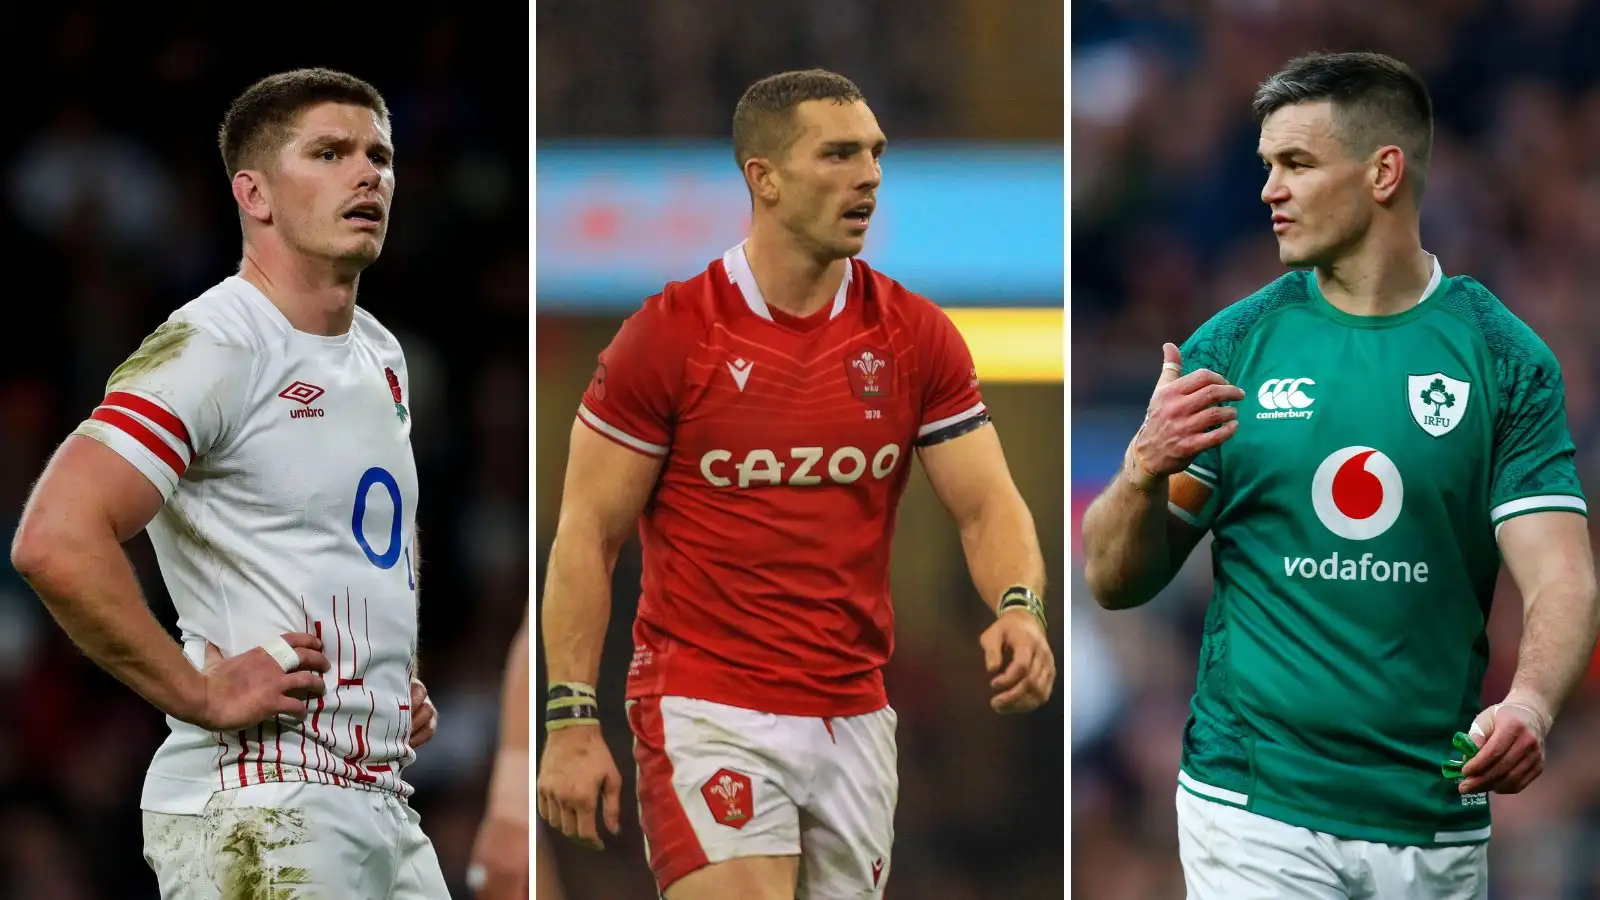 Records are made to be broken, and we are bound to see a few shattered during the 2023 Six Nations. Tallies posted by legends of the game, including Brian O'Driscoll, Sergio Parisse, Jonny Wilkinson and Ronan O'Gara, are under threat this year. We delve into the Six Nations' record books and look at the players who could break records in the Championship this year.